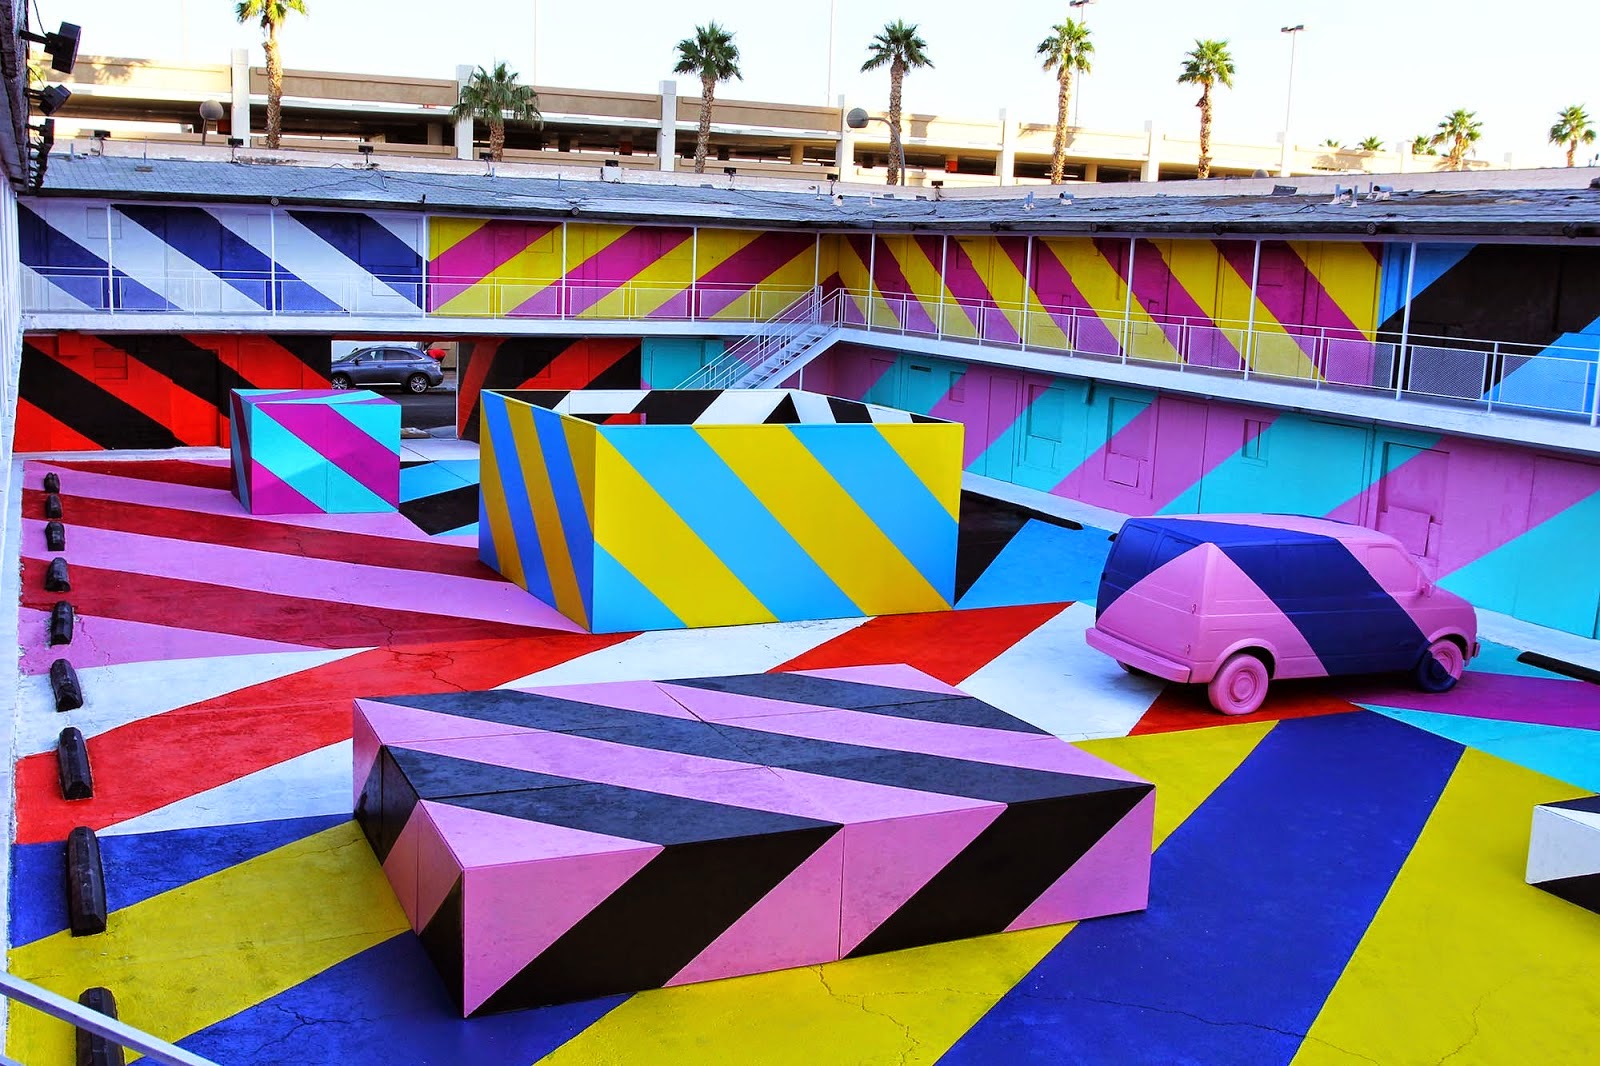 Street art and graffiti in Las Vegas: Where to go and who to see